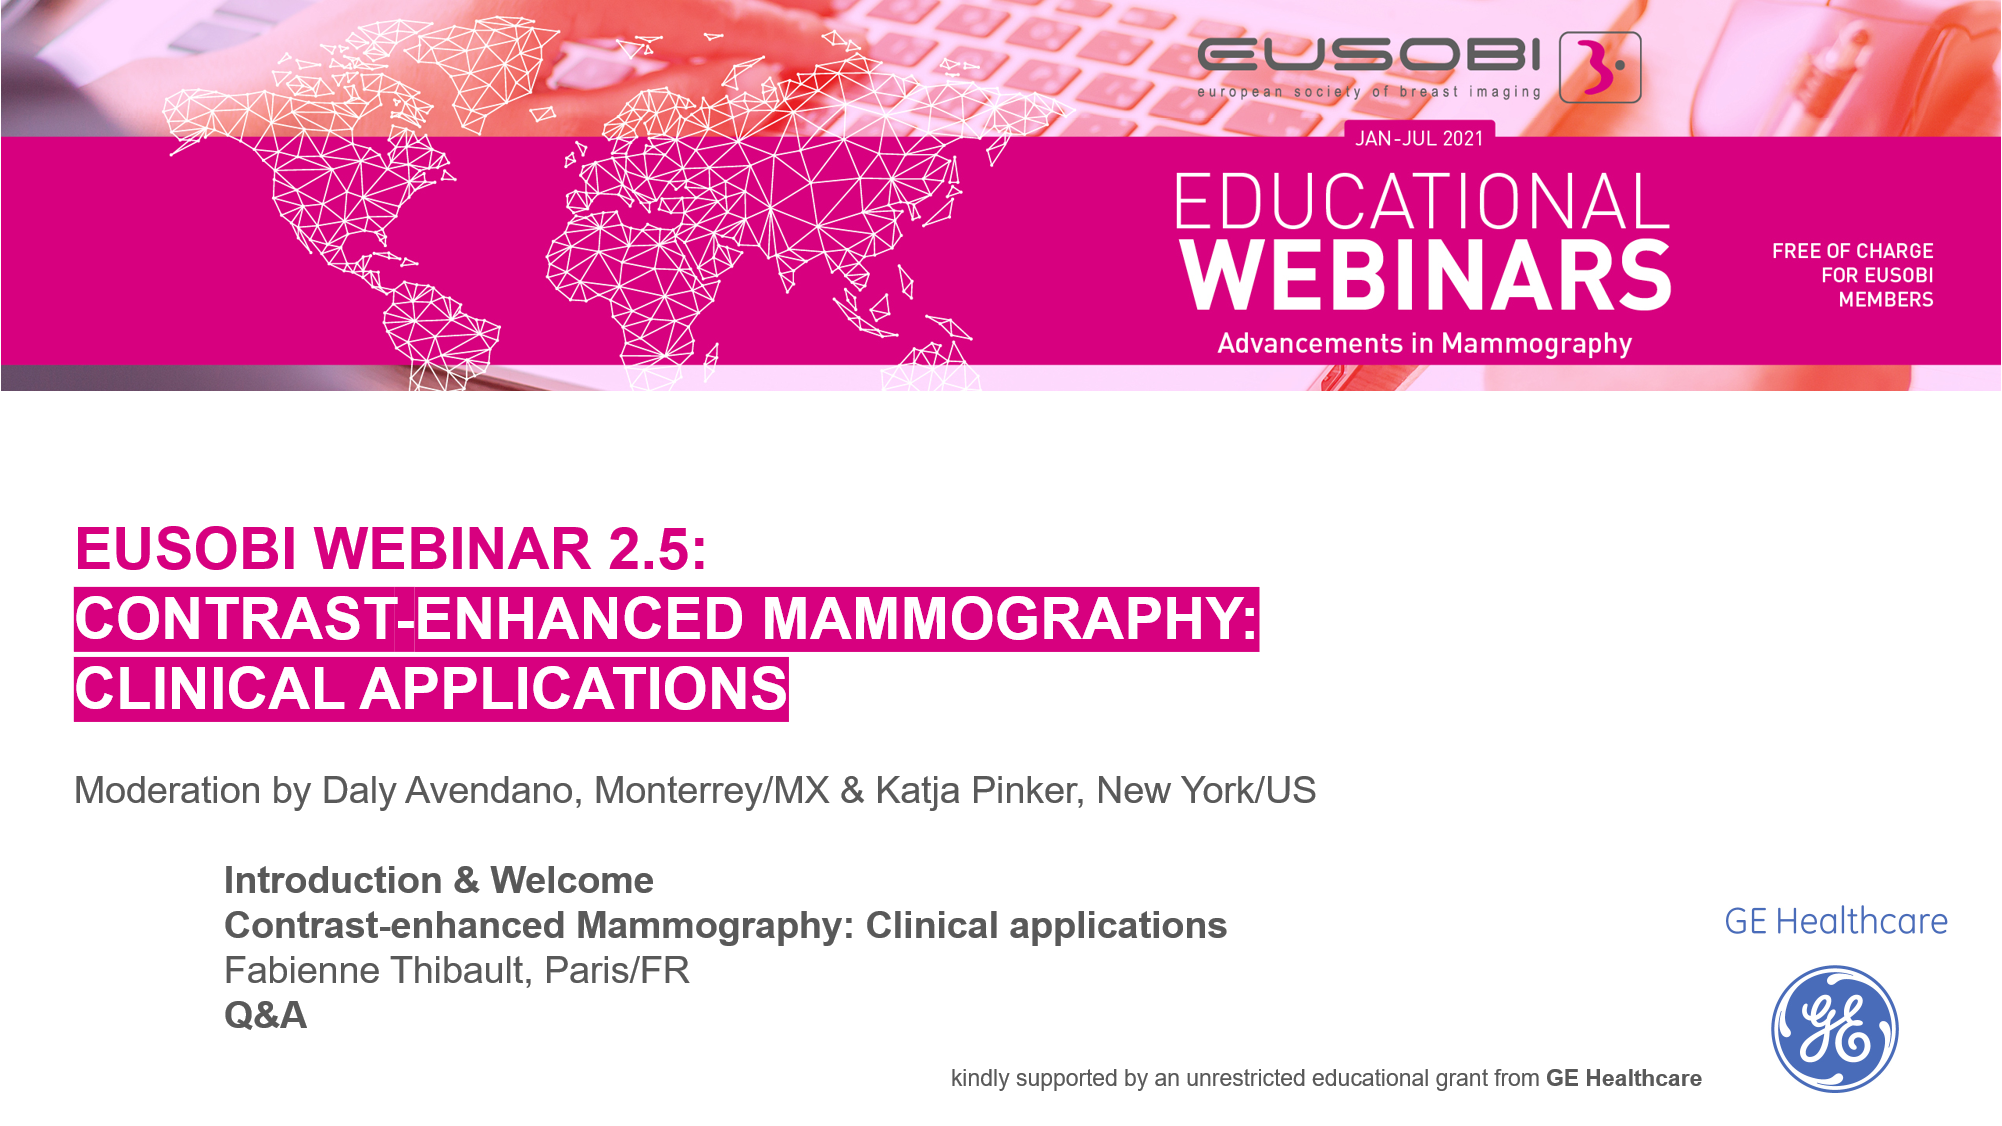 2.5 / Contrast-enhanced Mammography: Clinical applications